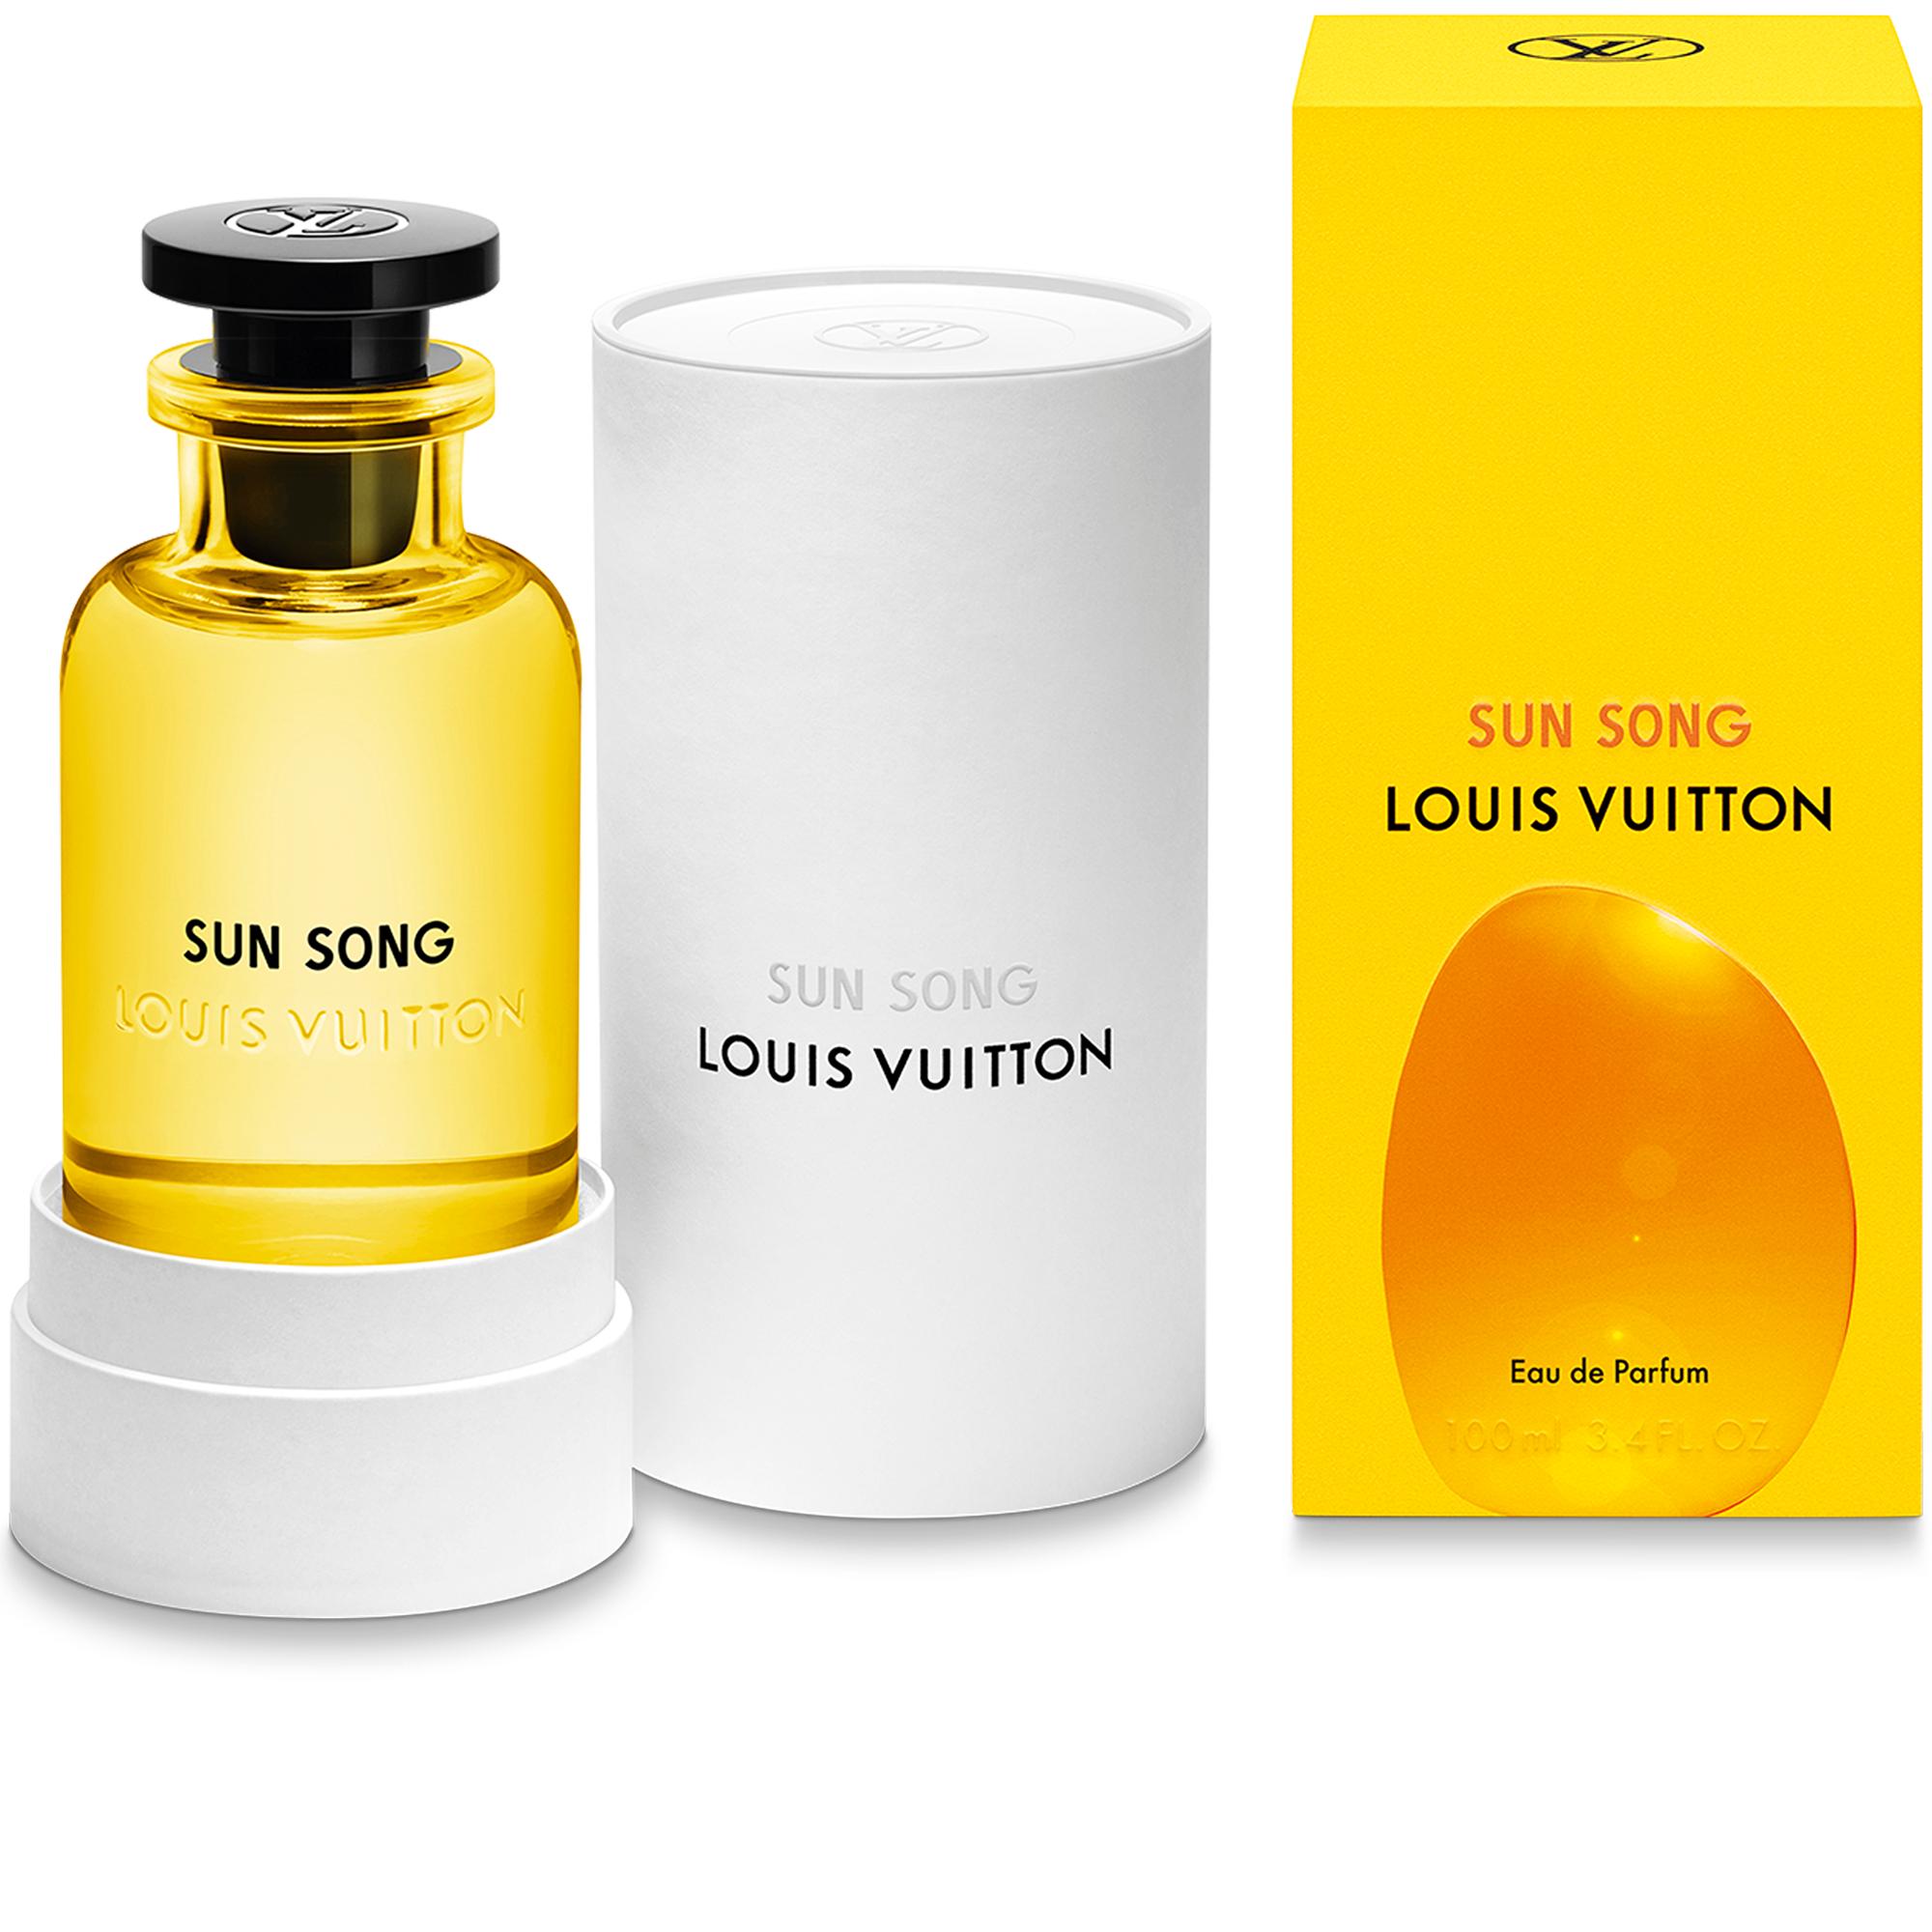 Pur Oud By Louis Vuitton Perfume Sample Decant By Scentsevent